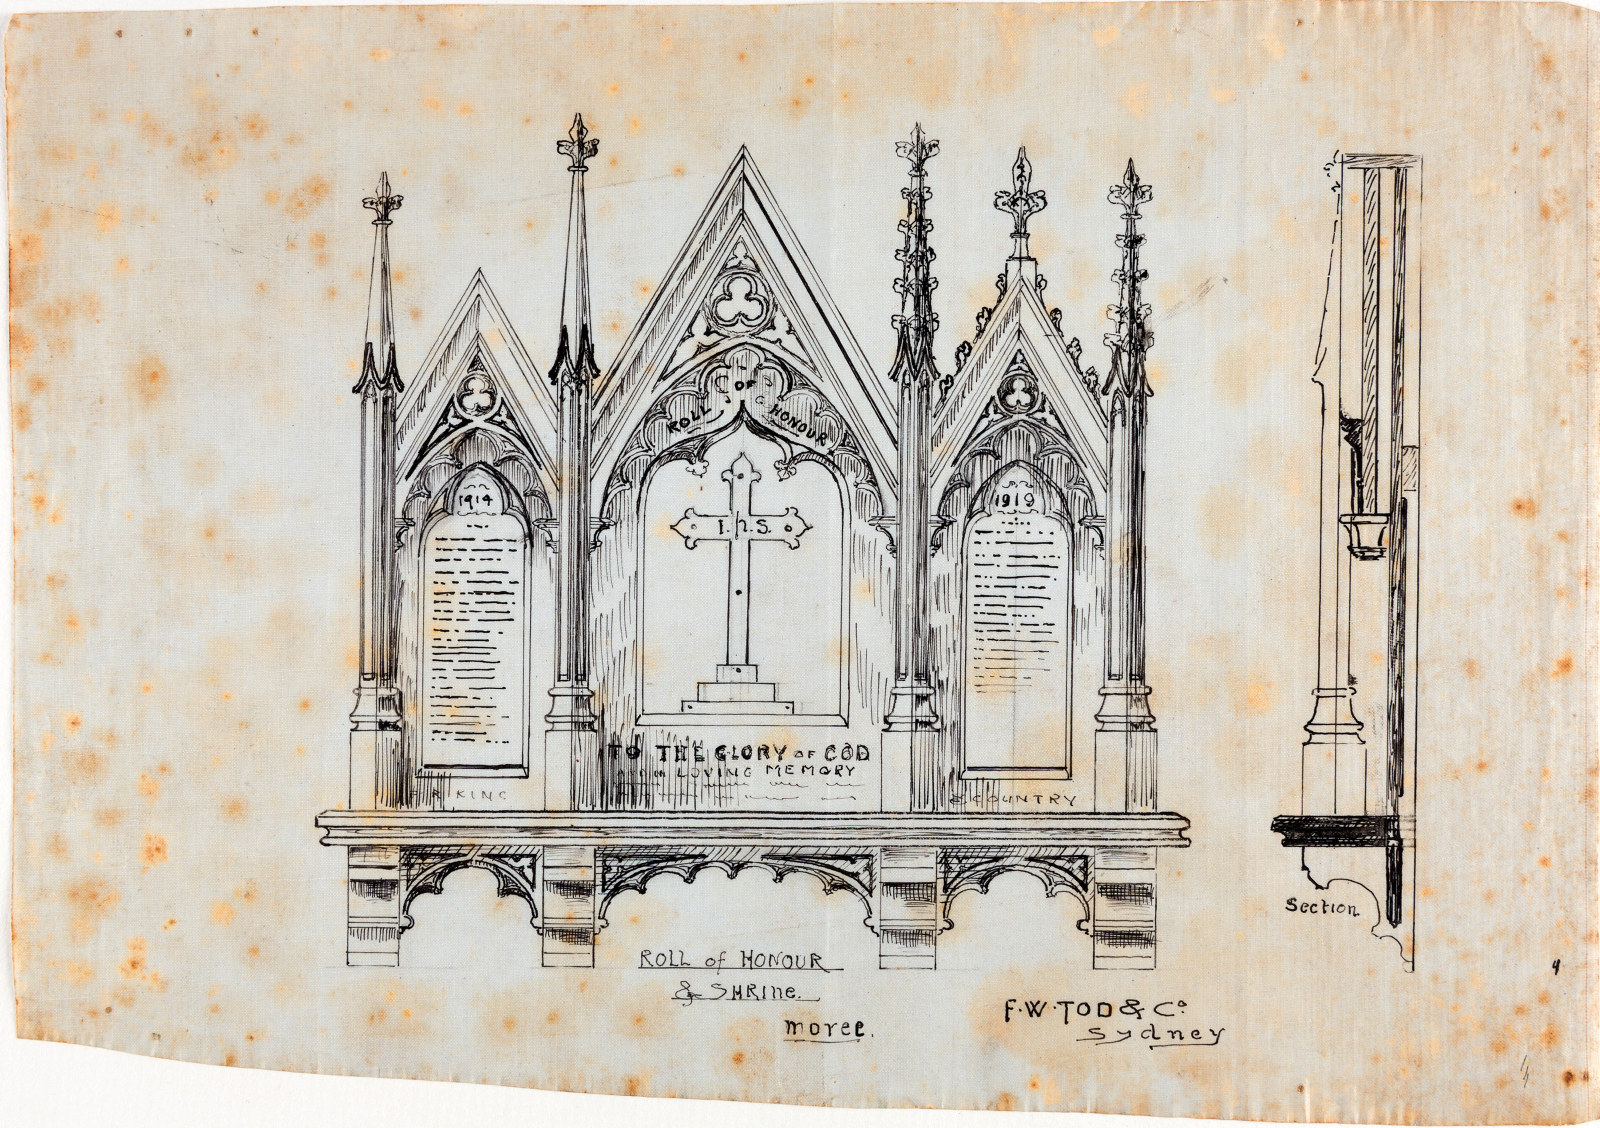 Design for 'Honour Roll & Shrine' Moree  by F.W. Tod & Co.